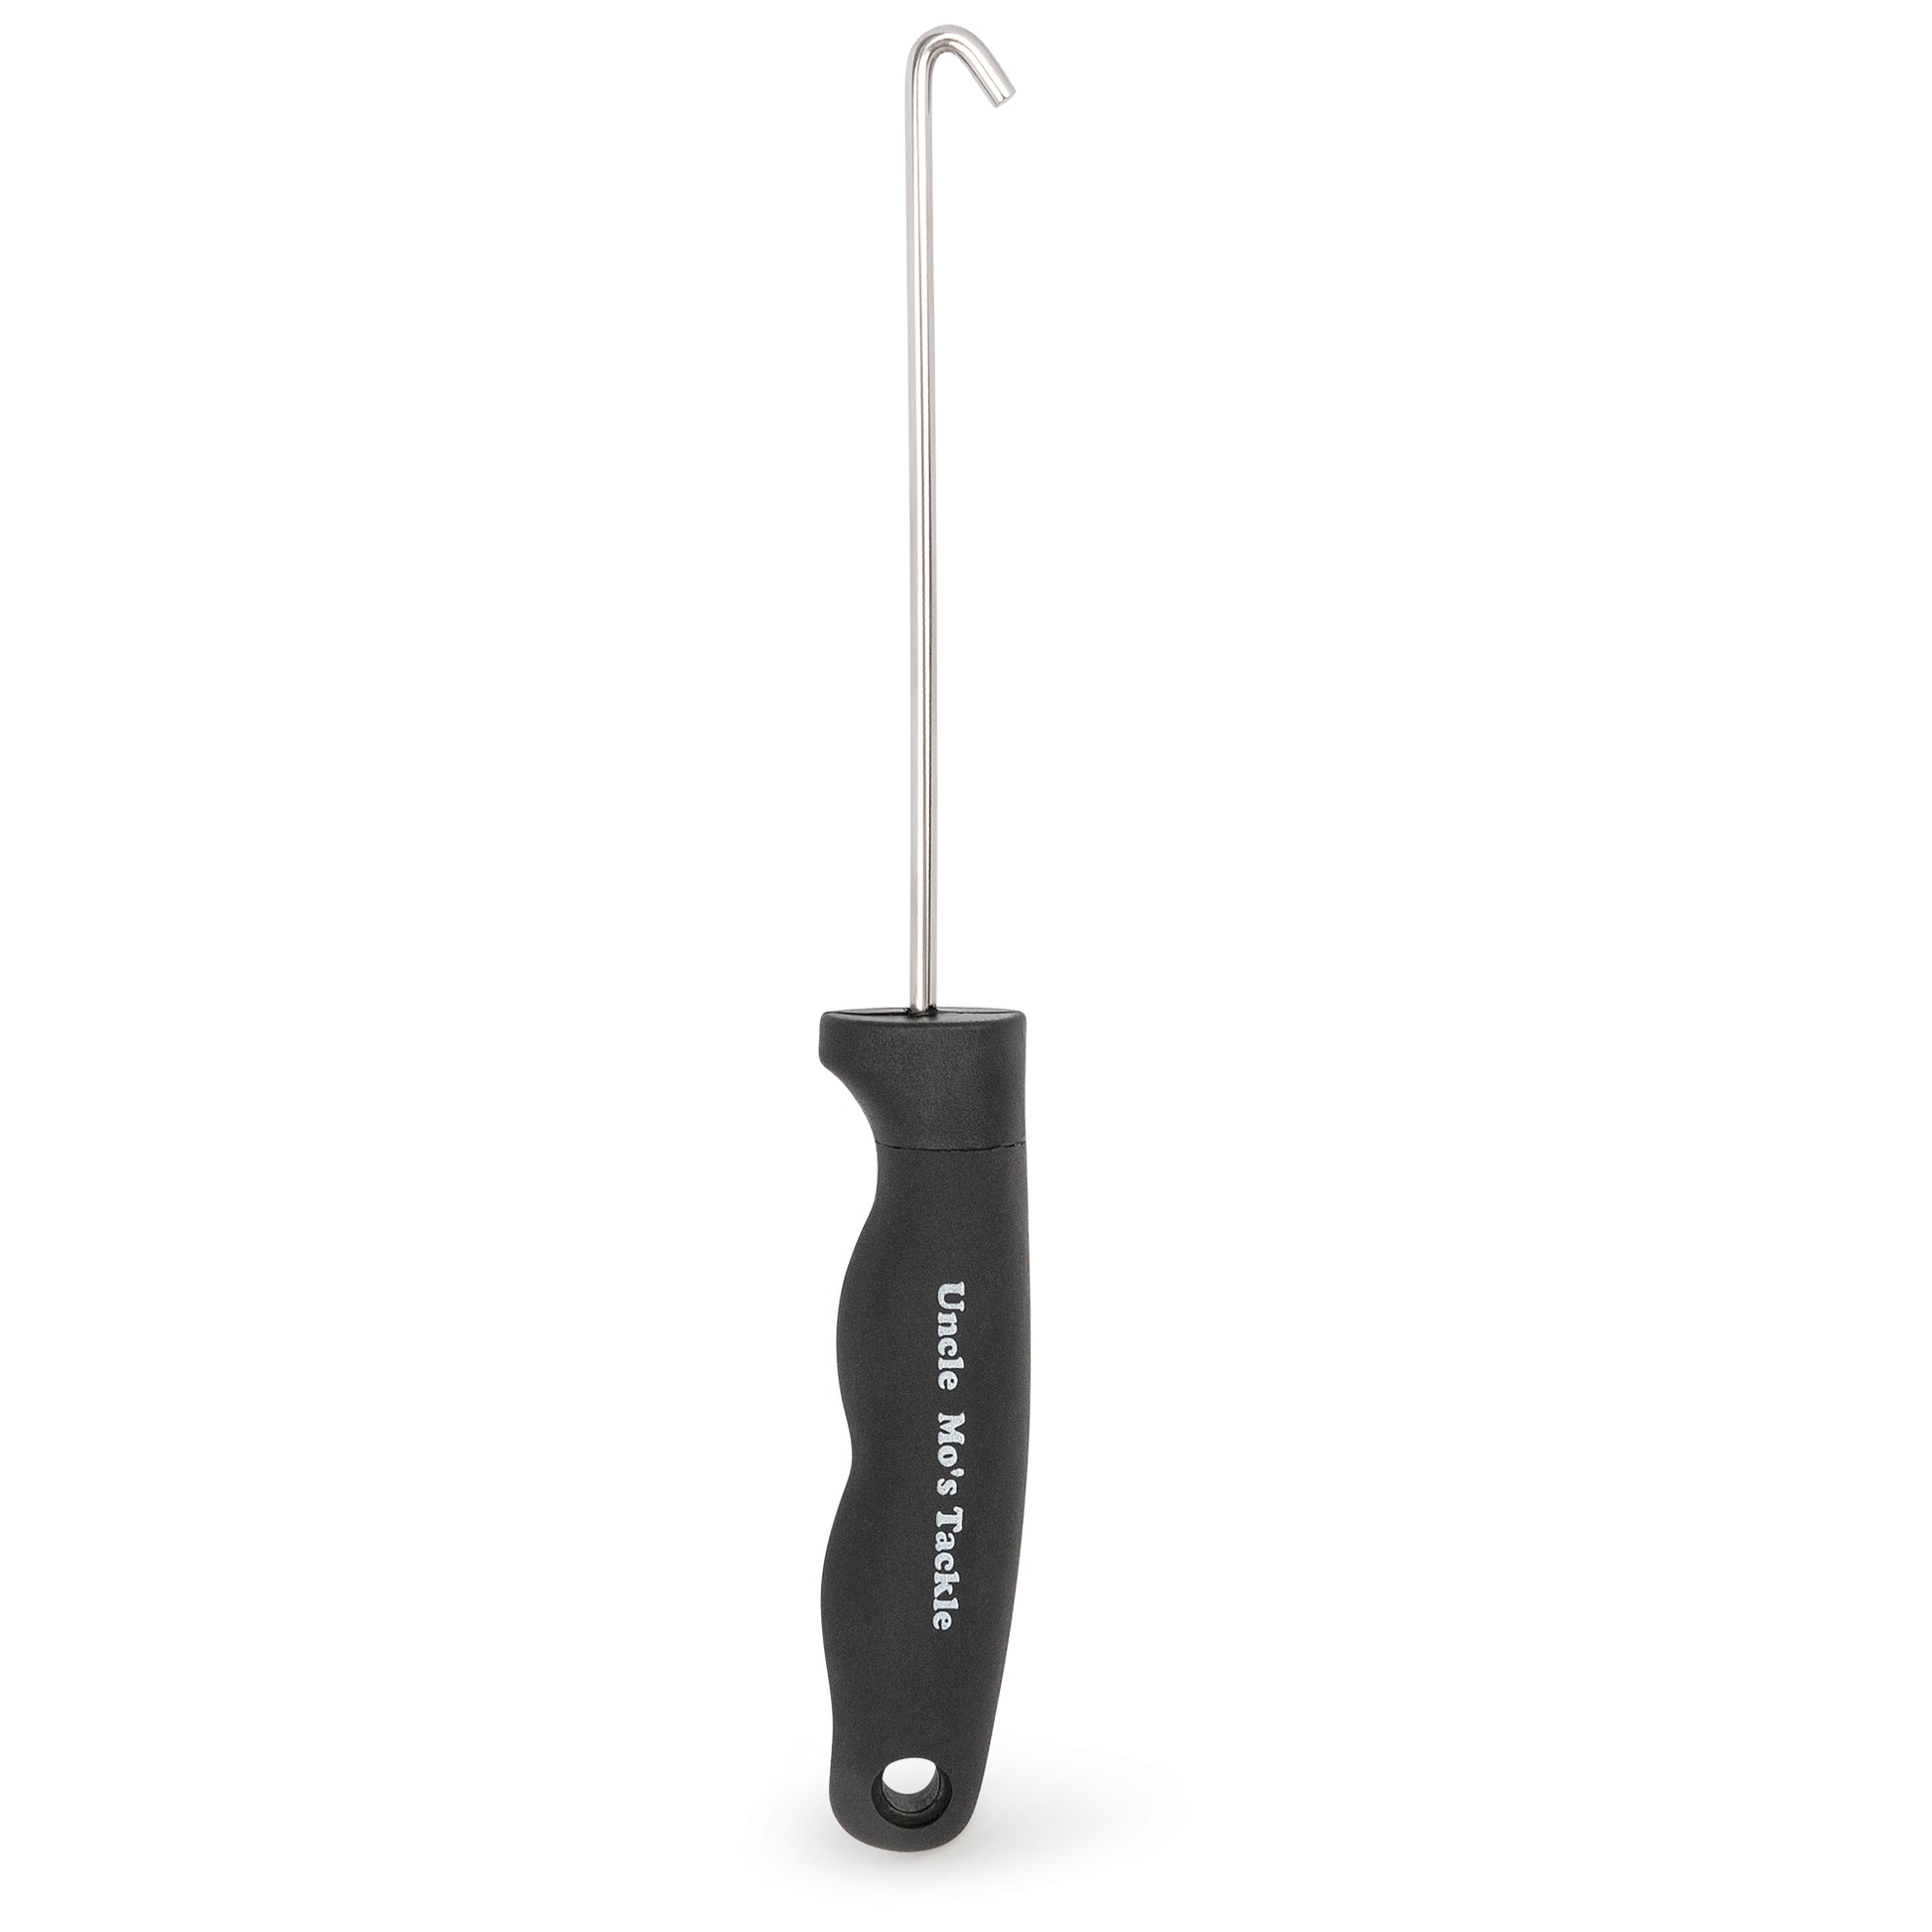 Fishing Hook Remover Tool